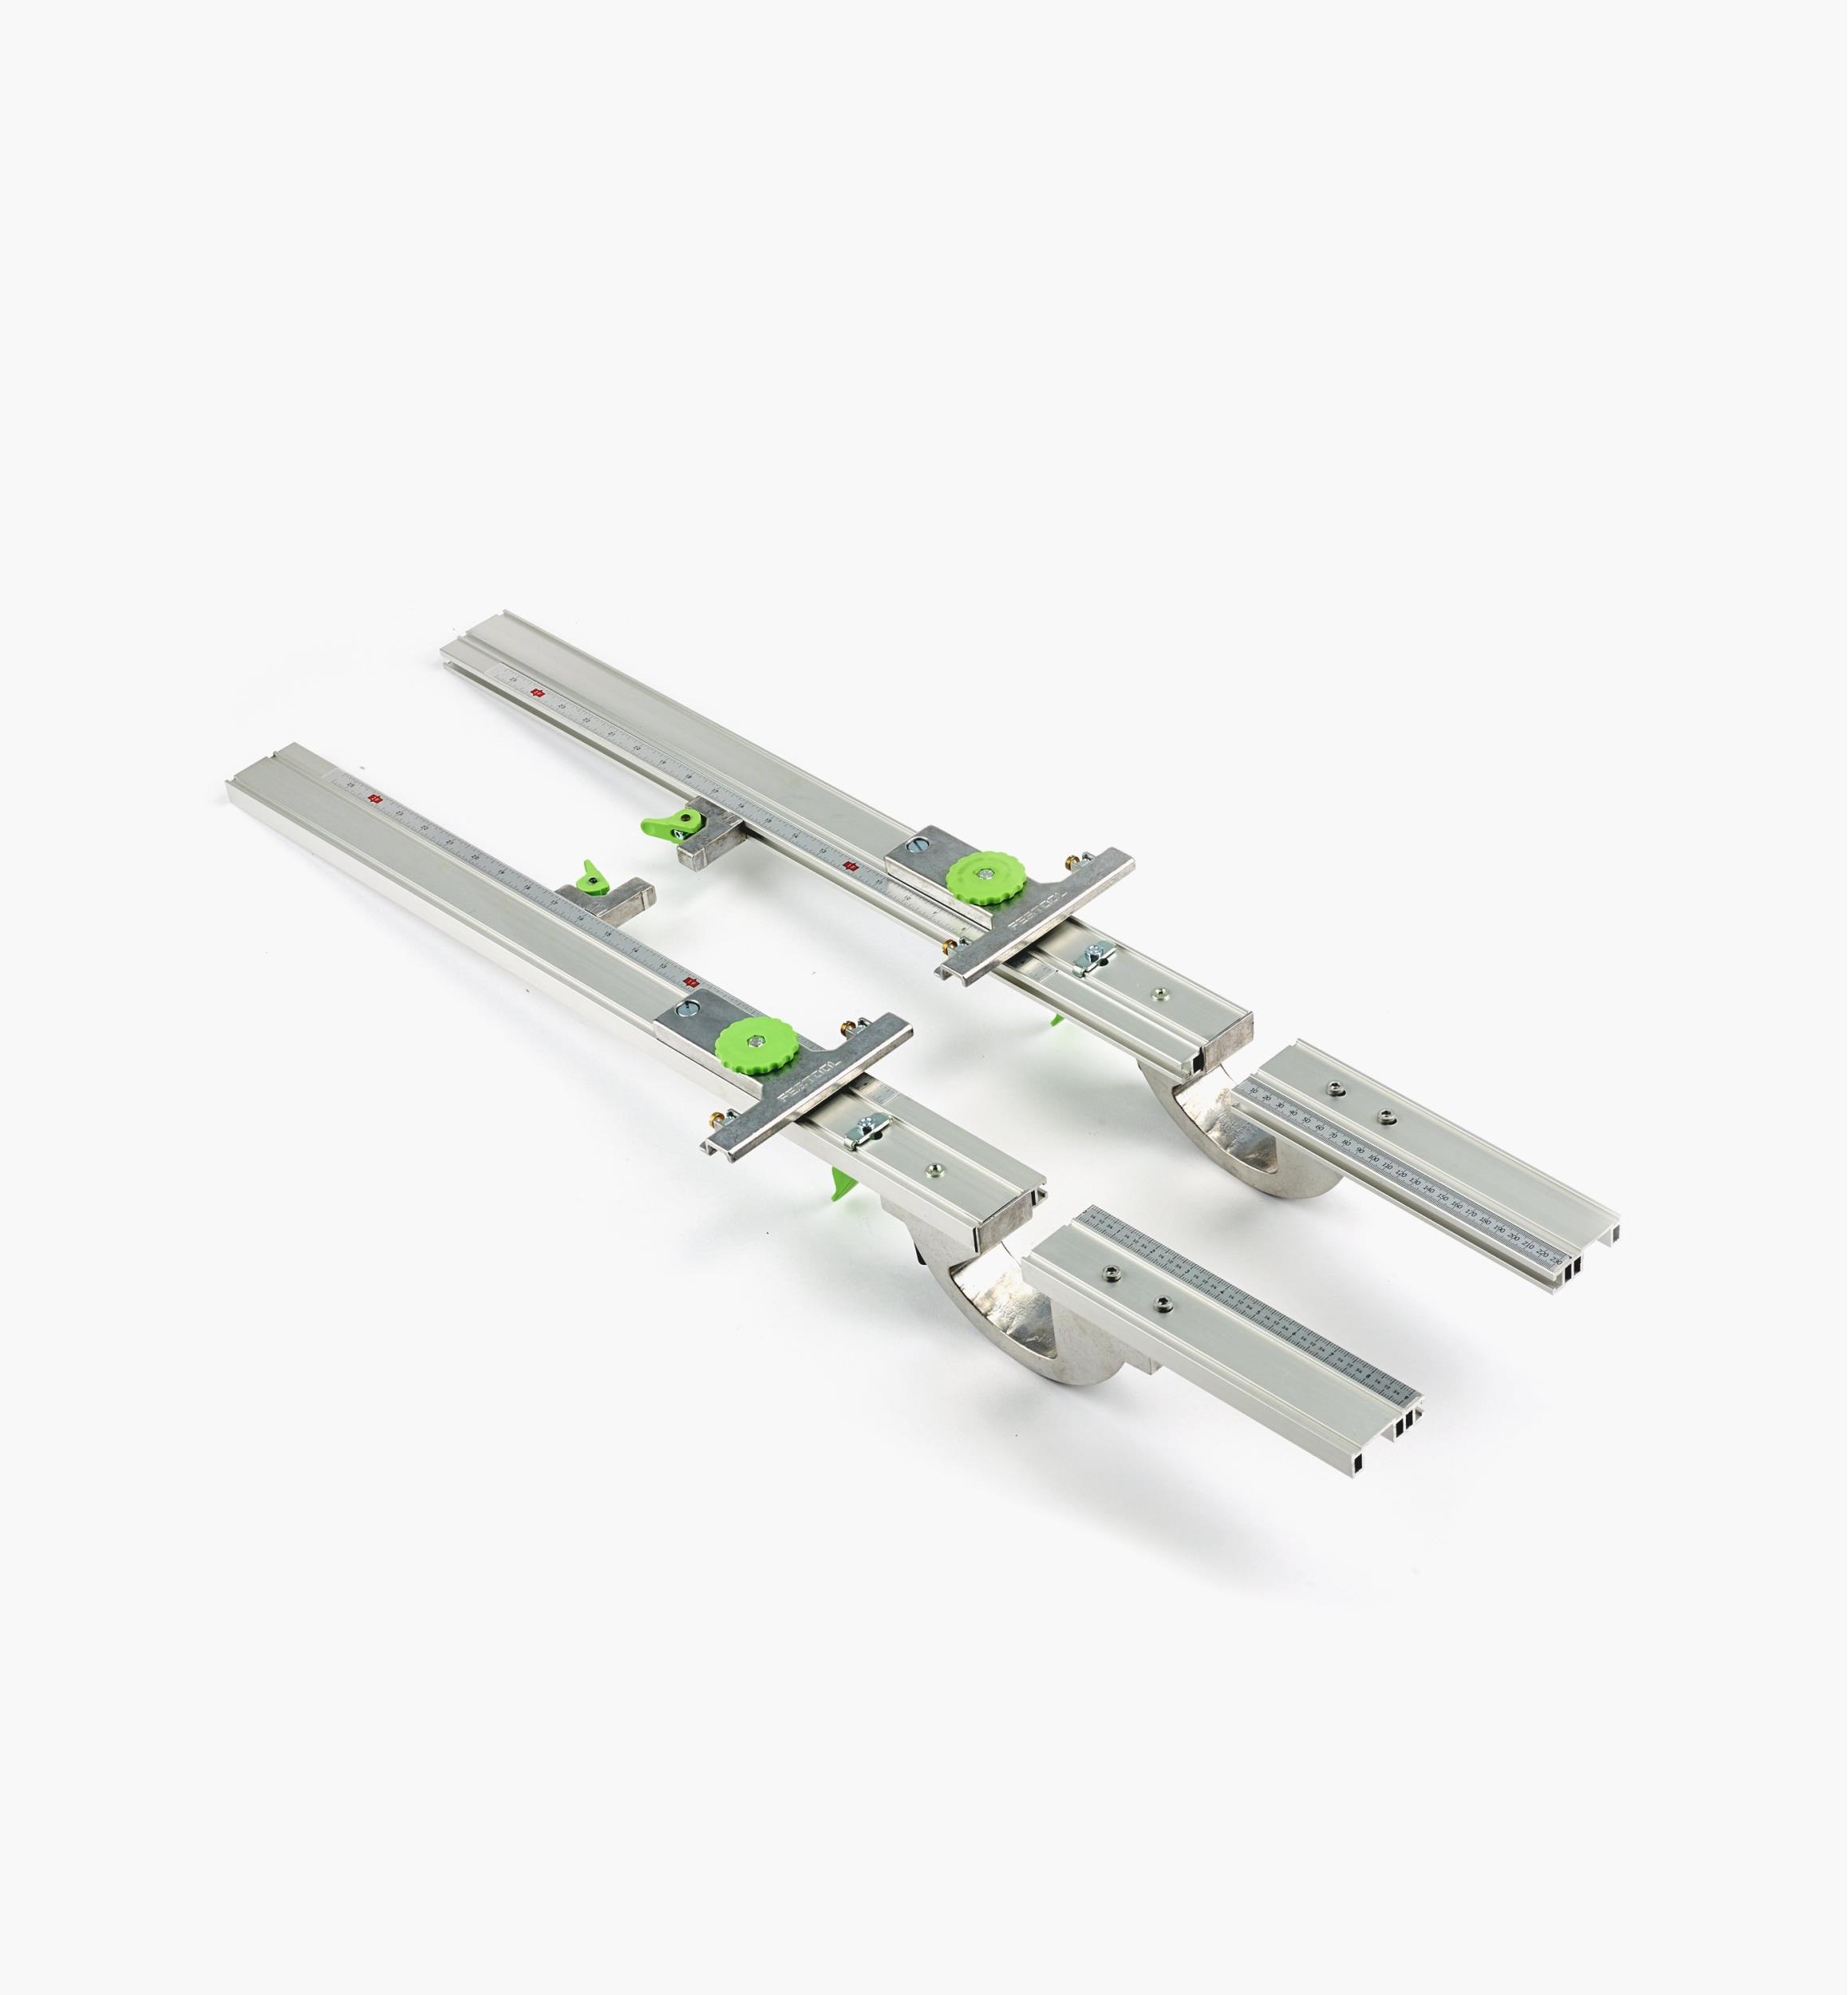 Festool 203160 Parallel Guide Set For Guide Rail System, Imperial 